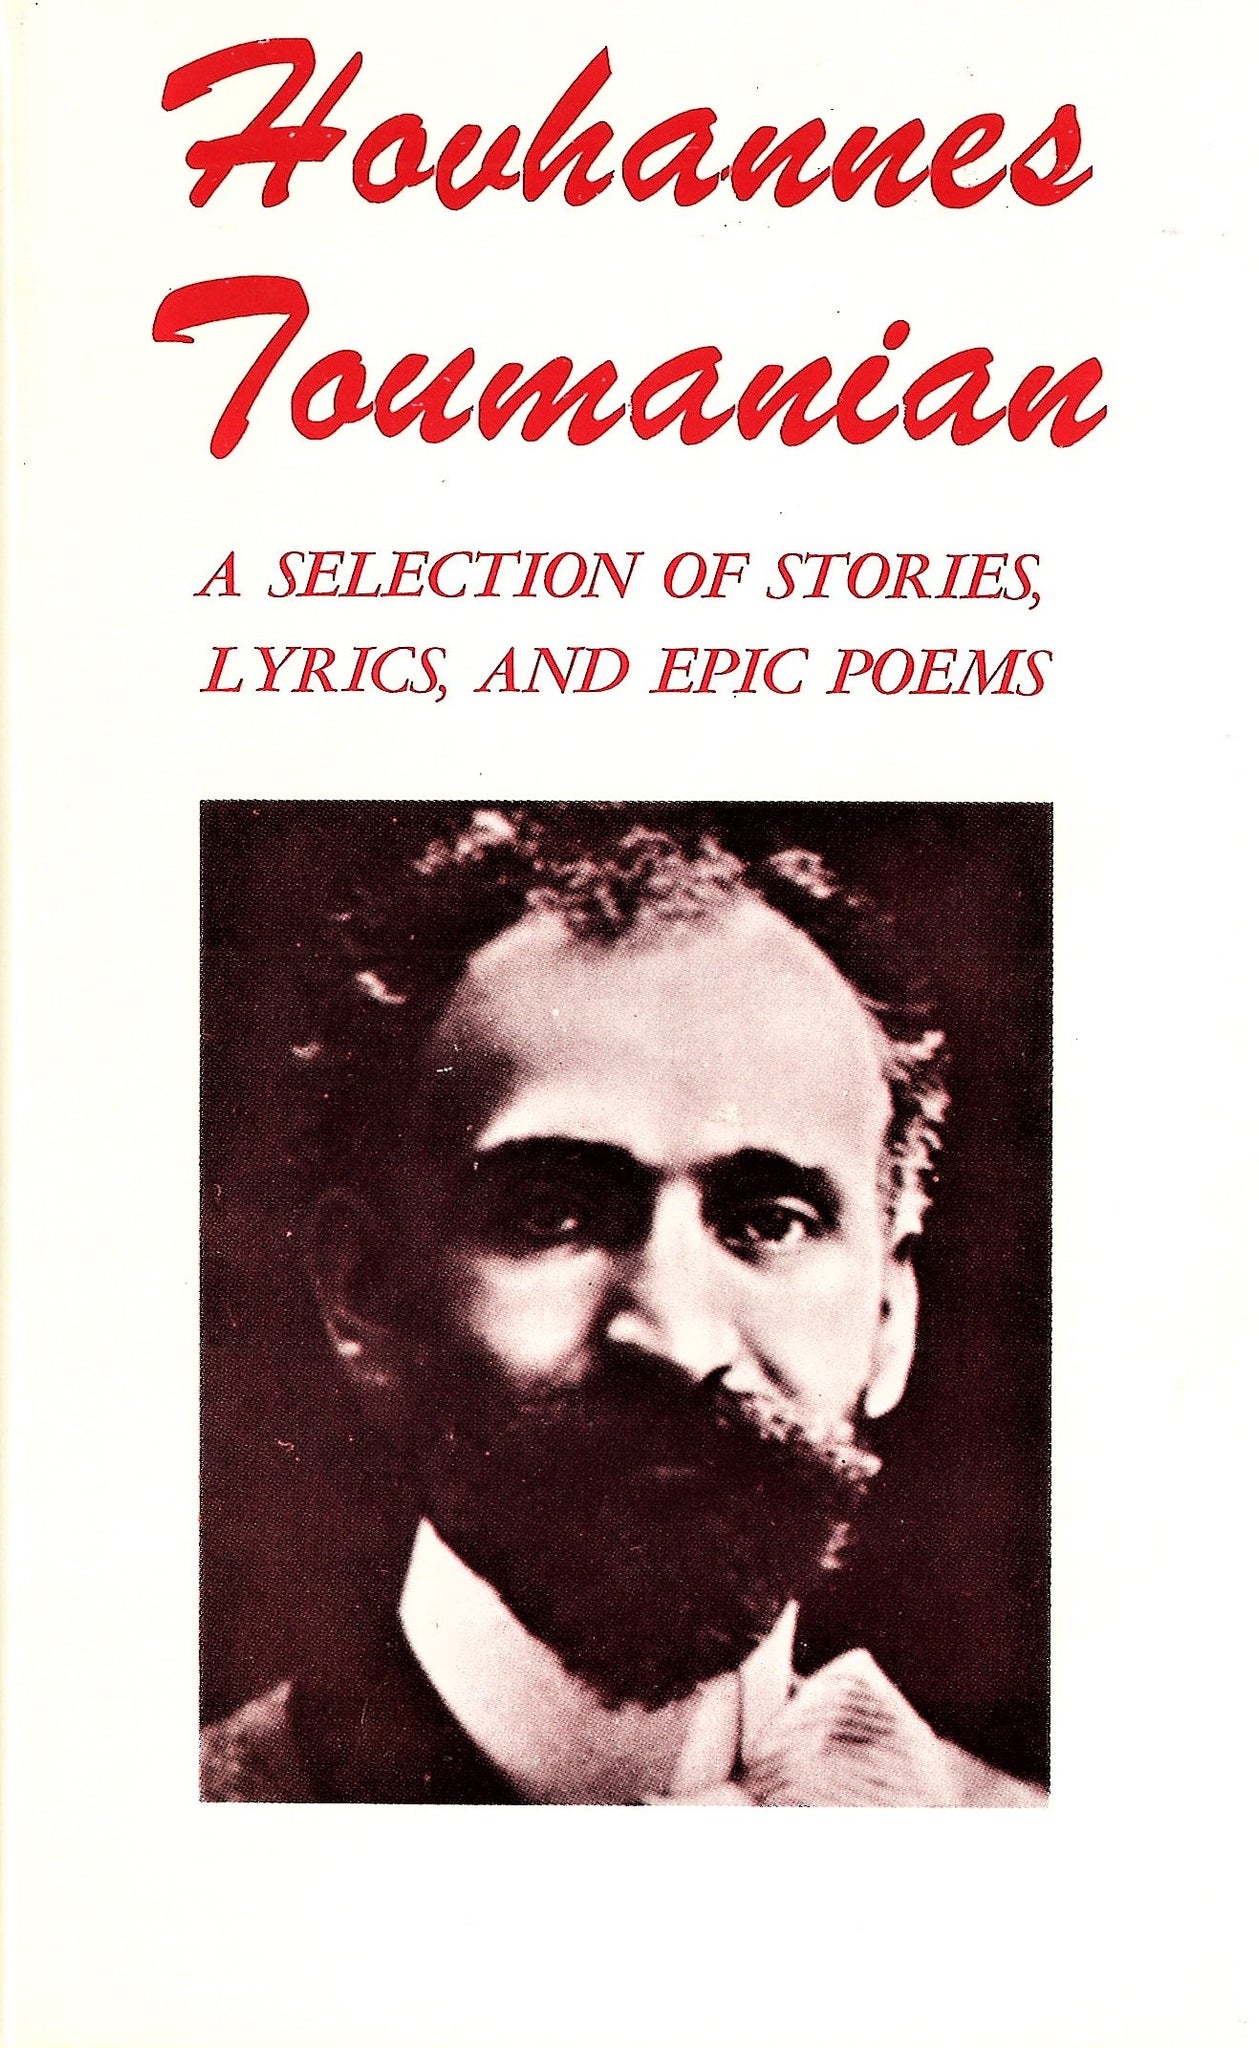 HOVHANNES TOUMANIAN: A Selection of Stories, Lyrics, and Epic Poems